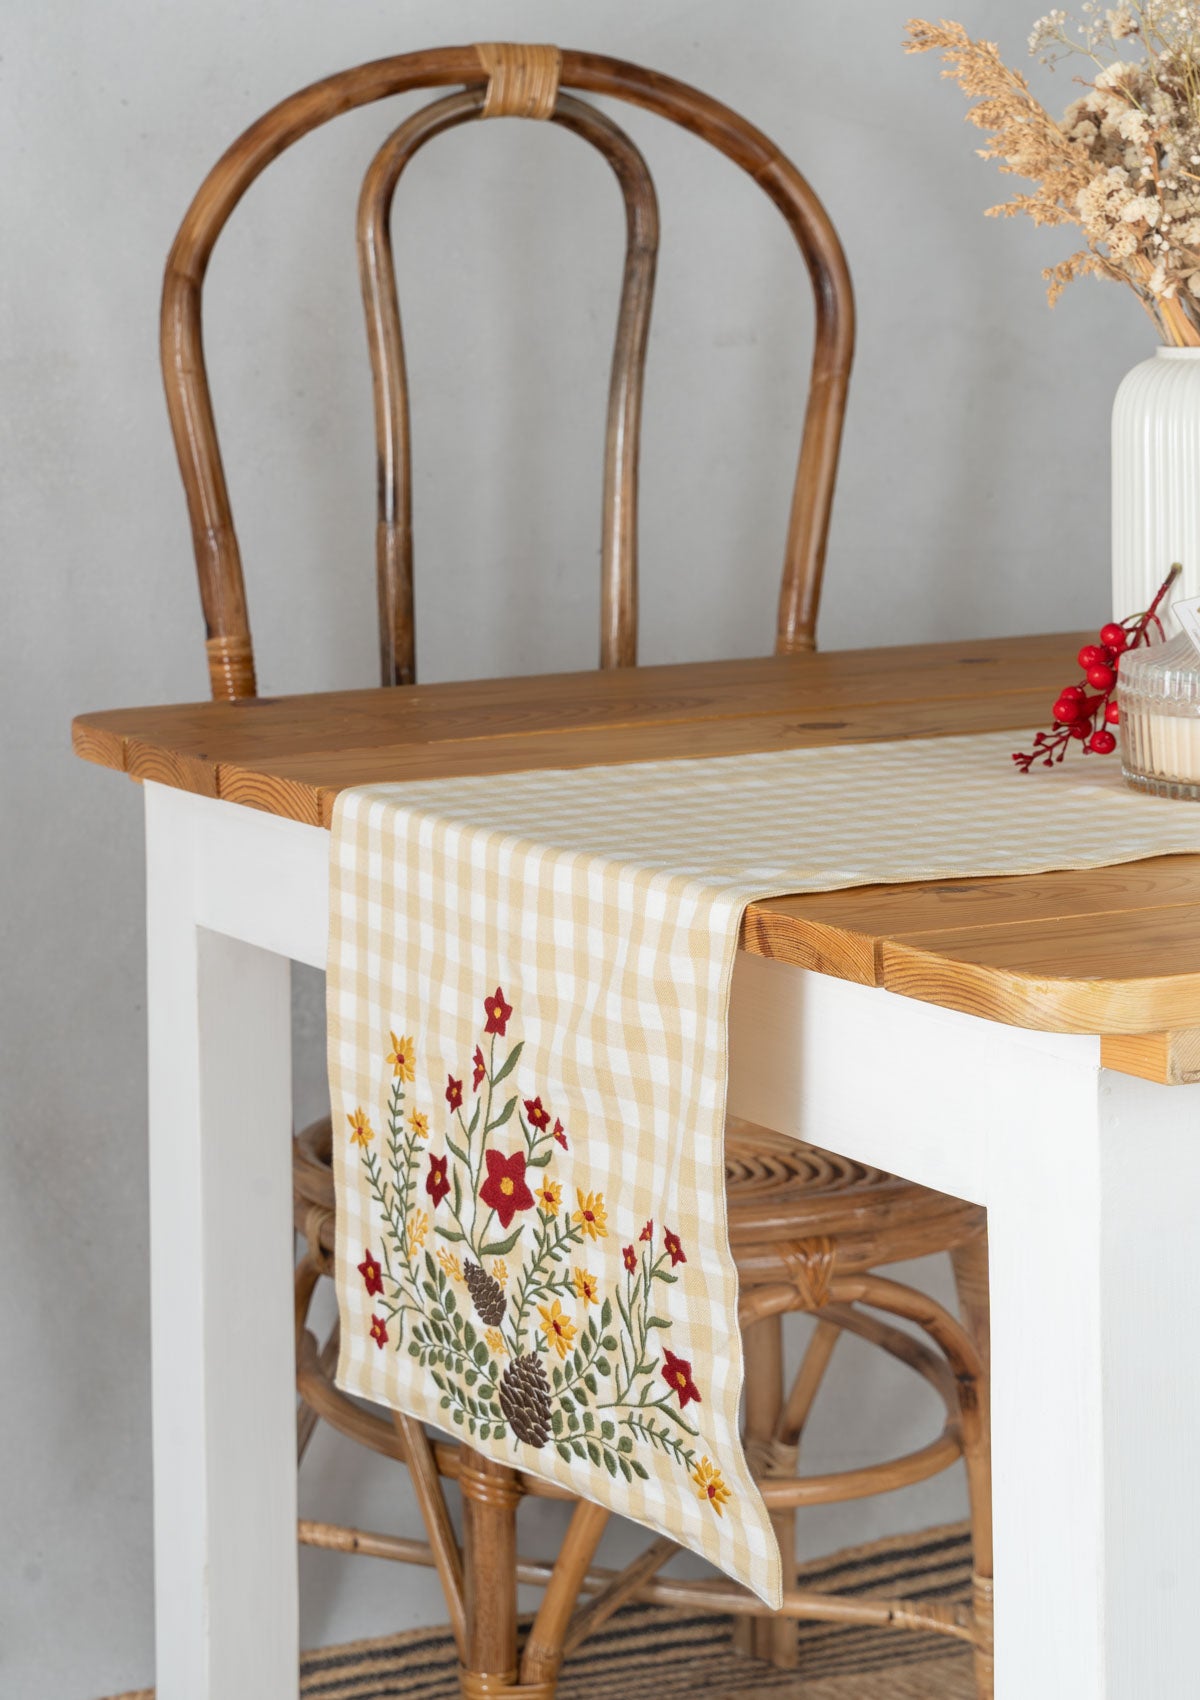 Conifers 100% cotton elegant table runner for 4 seater or 6 seater Dining with tassels - Cream